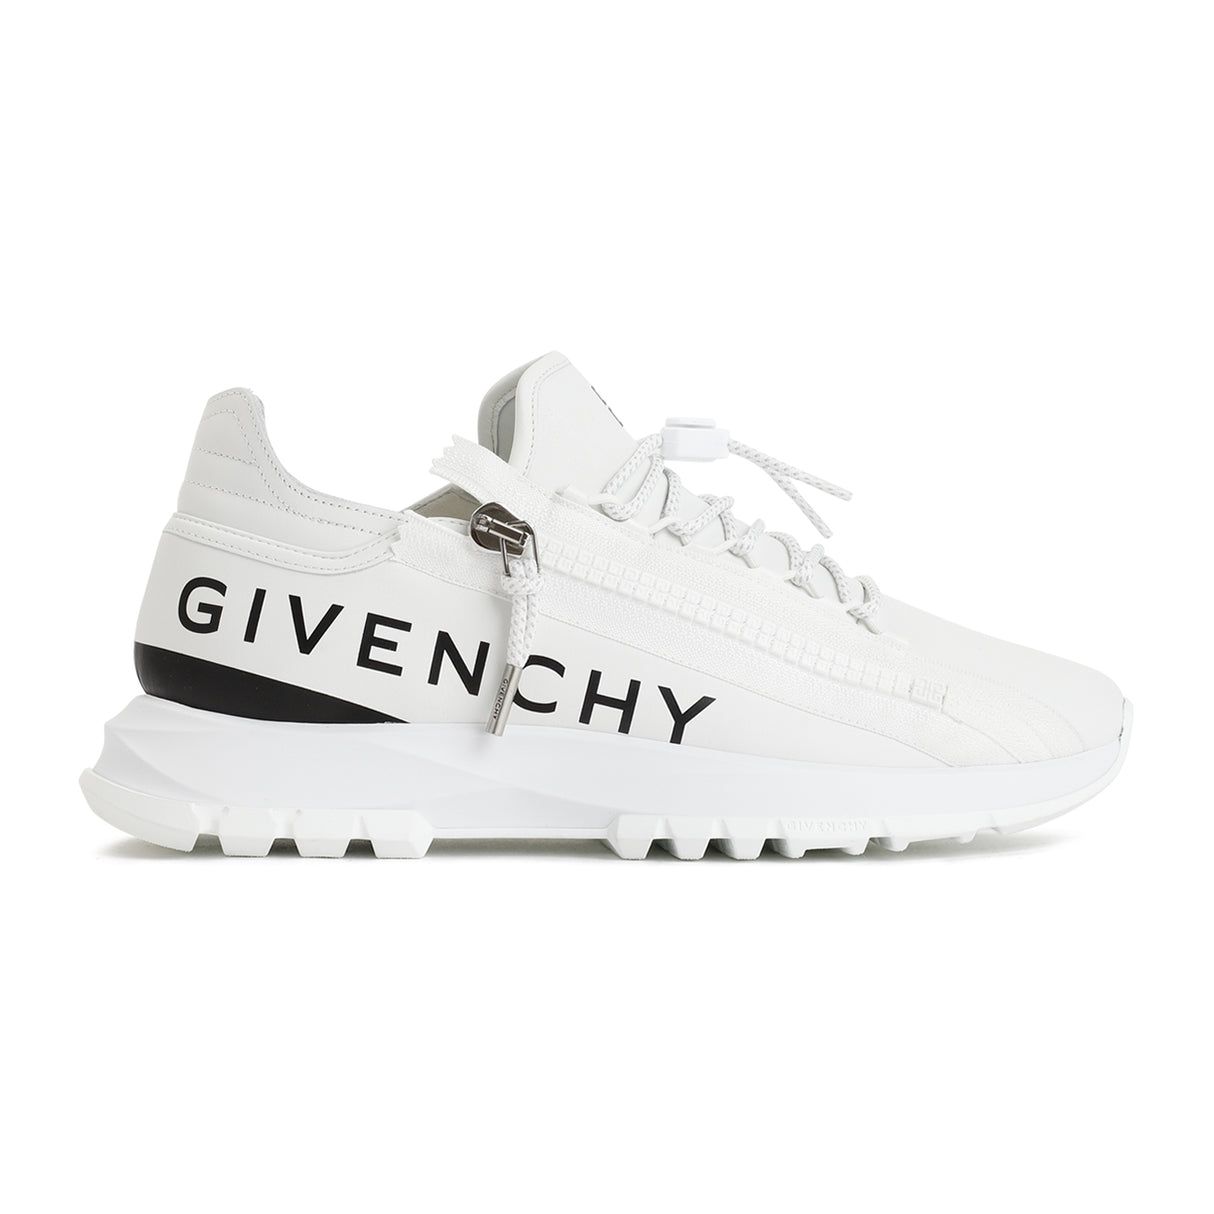 GIVENCHY Spectre Zip Runners for Men - White